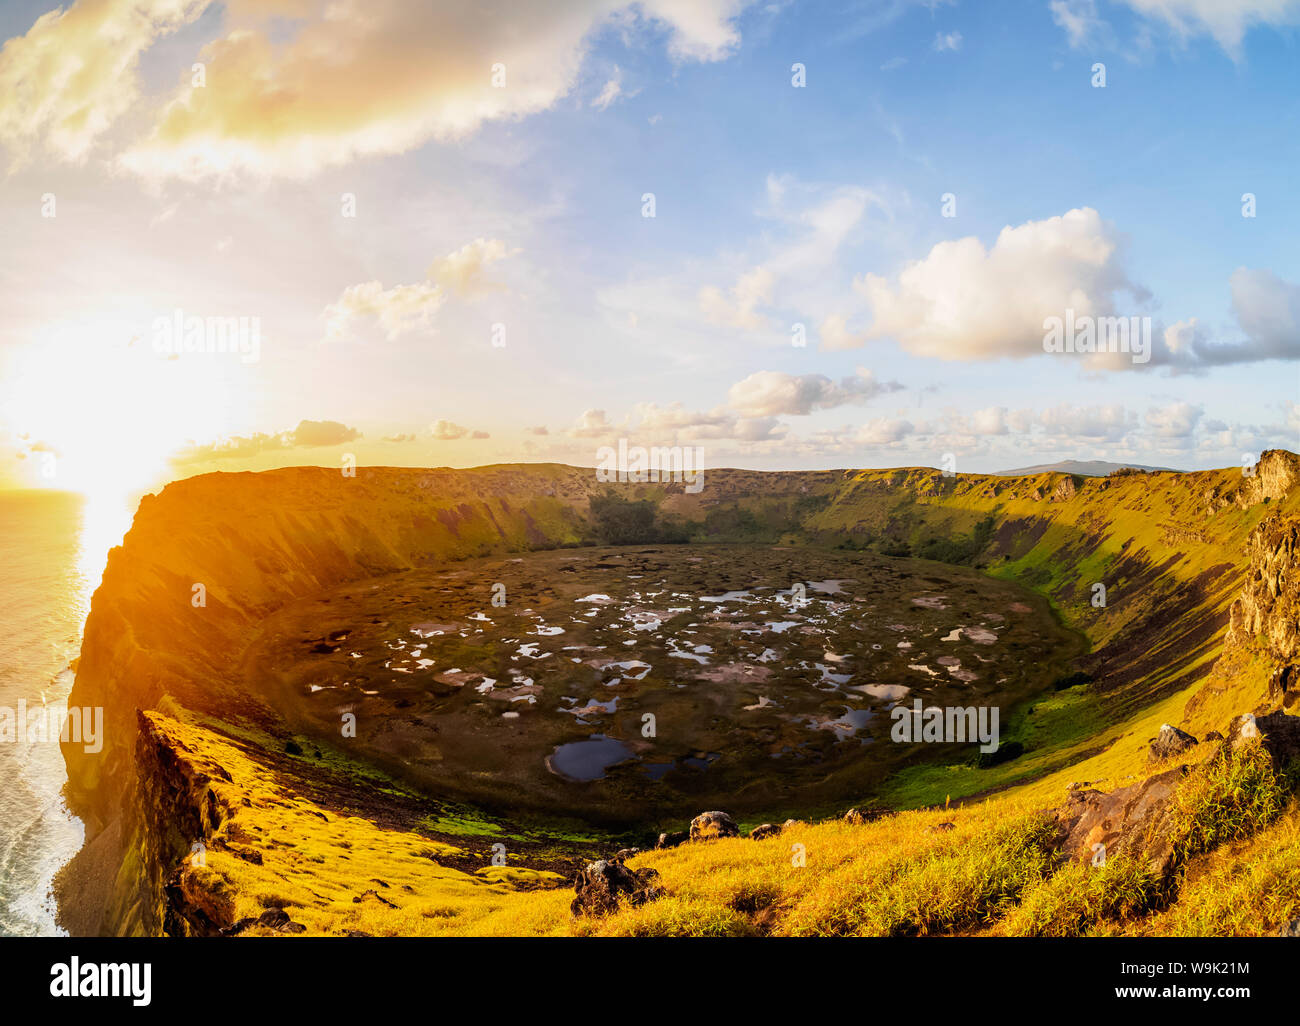 Crater of Rano Kau Volcano at sunset, Easter Island, Chile, South America Stock Photo